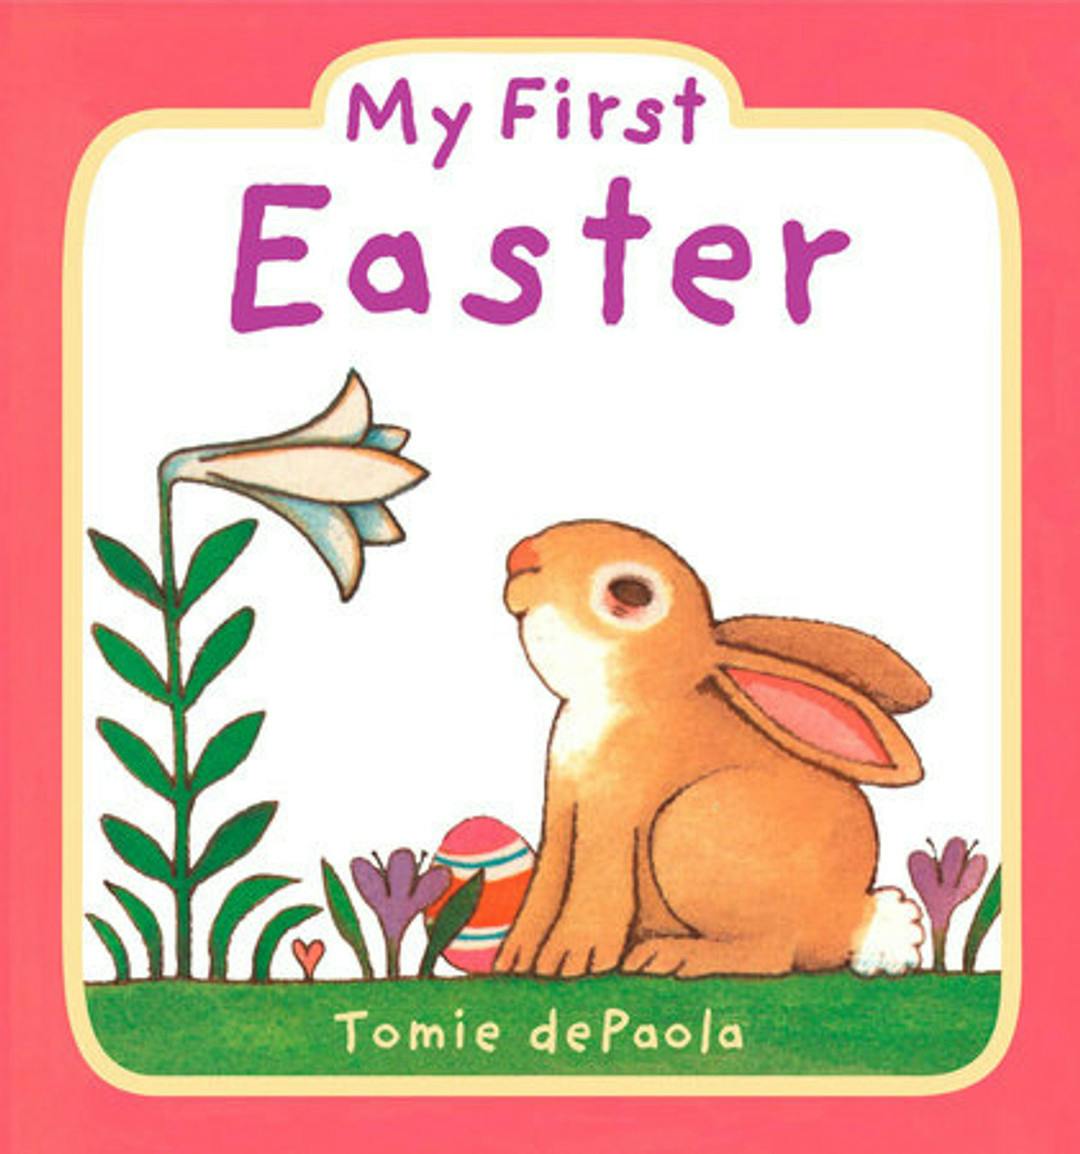 My First Easter (board book)